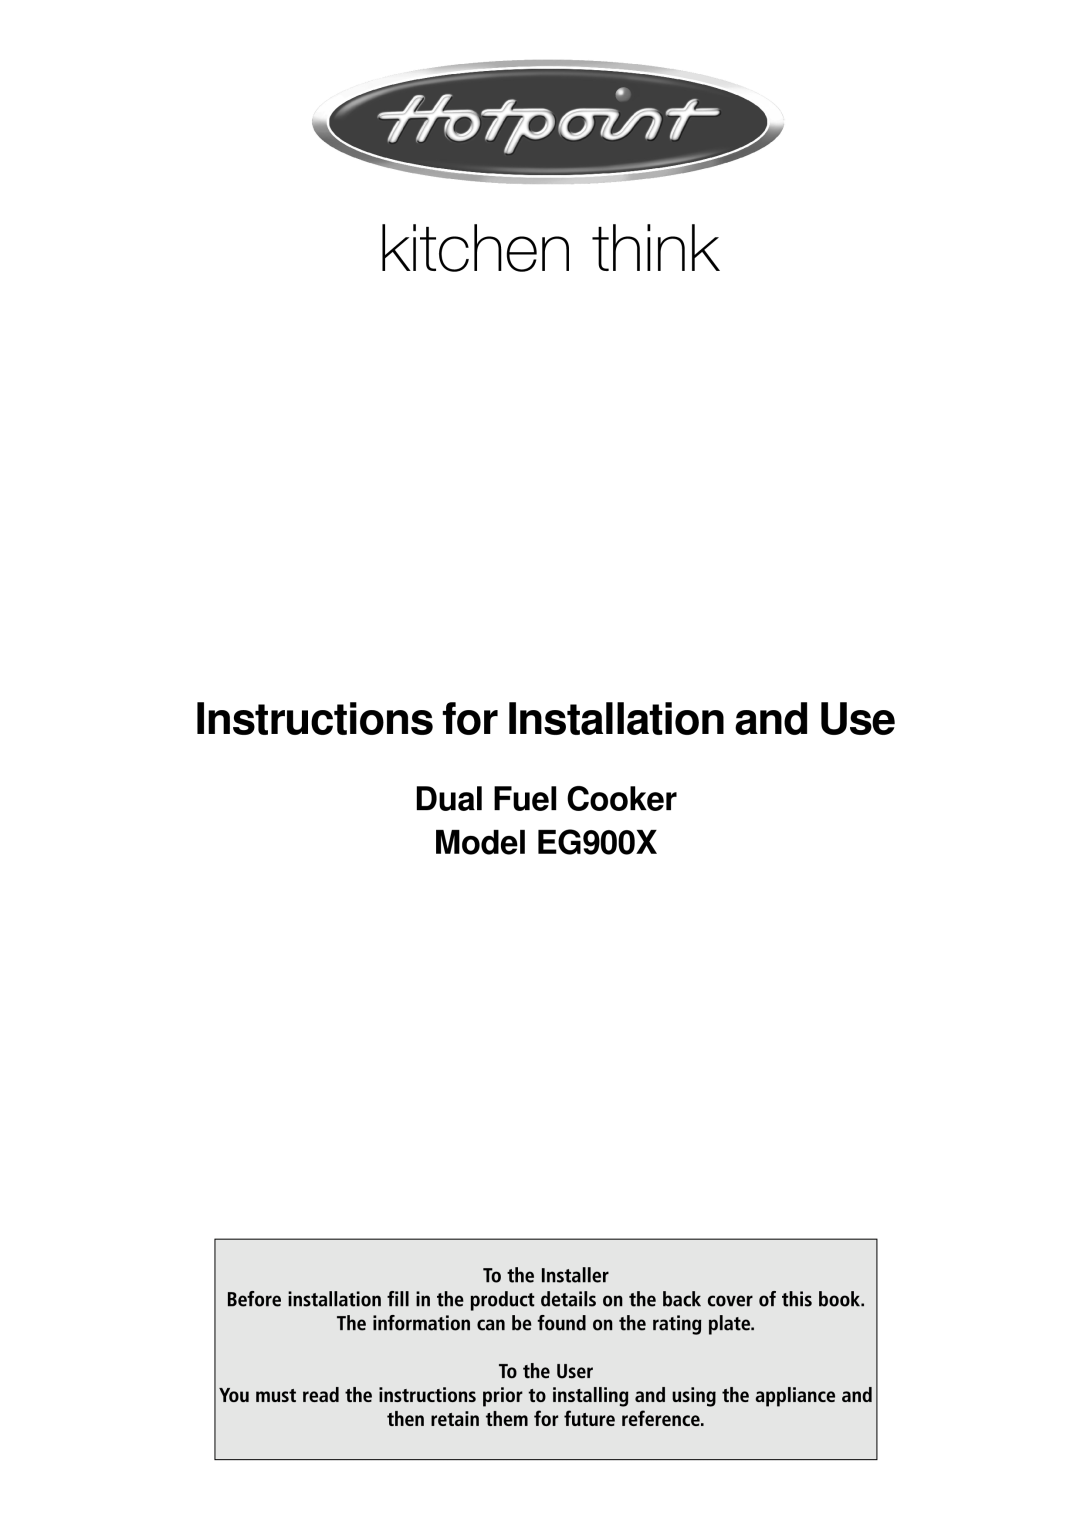 Hotpoint manual Dual Fuel Cooker Model EG900X, Instructions for Installation and Use 